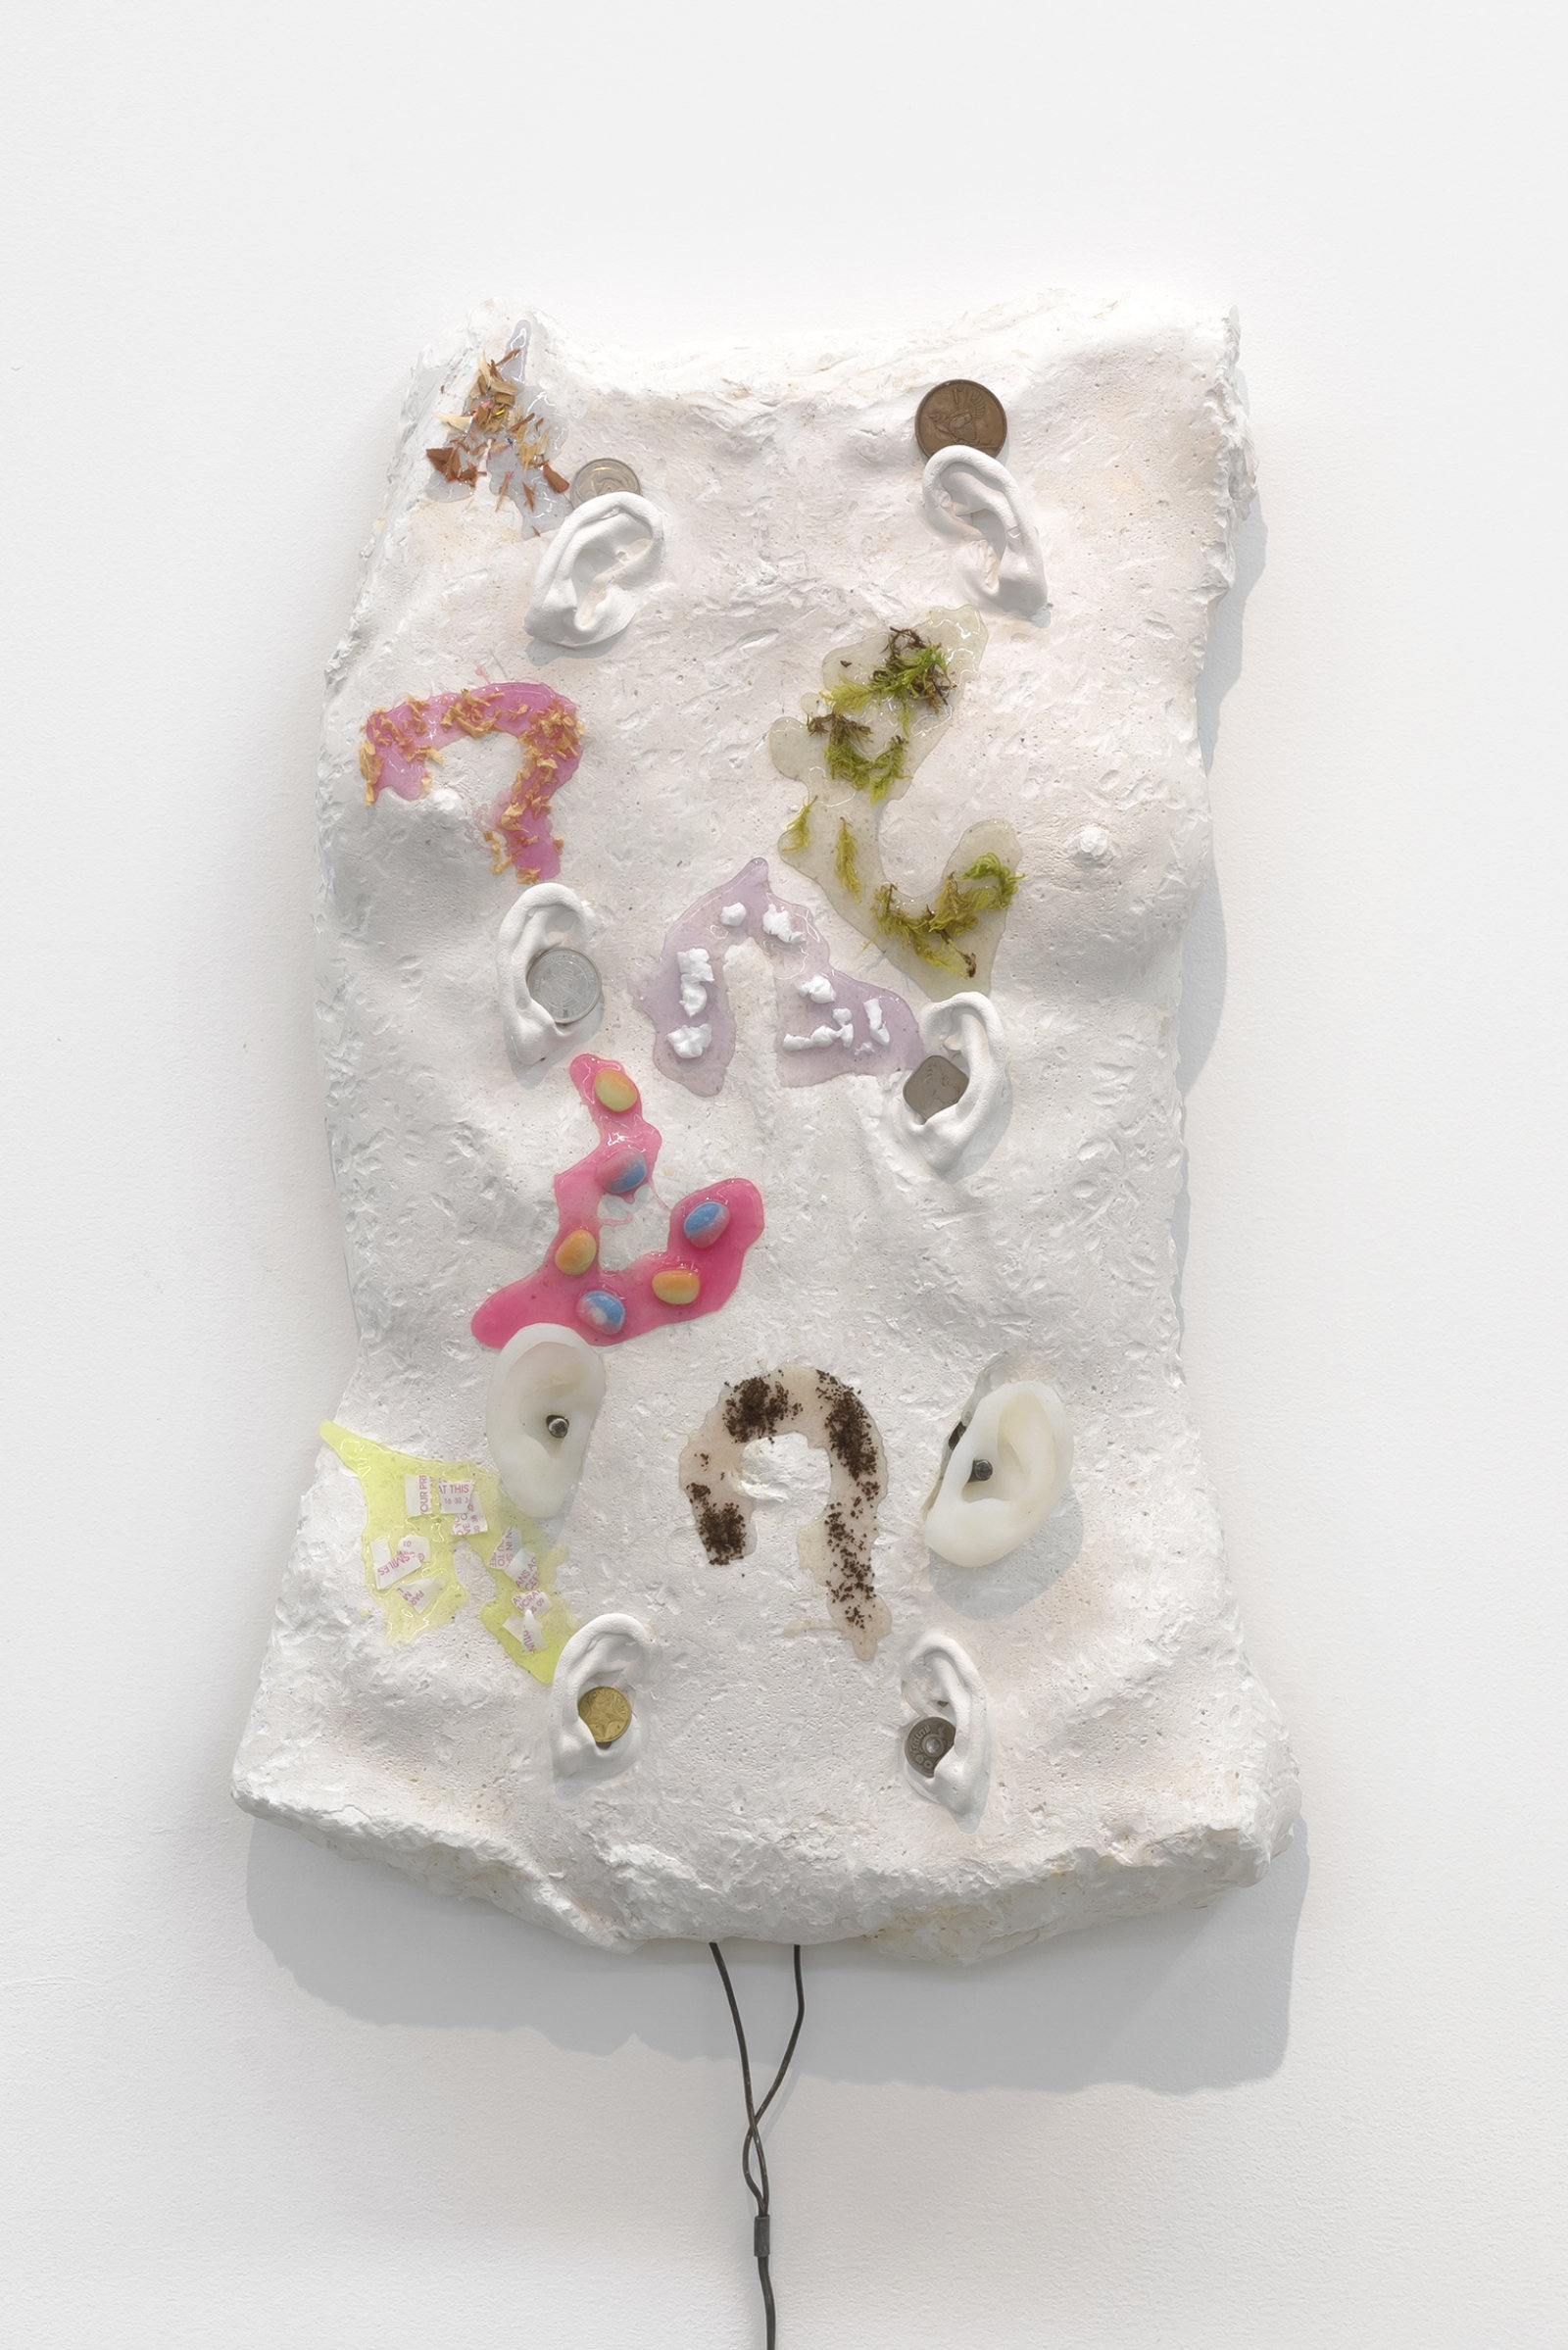 Kasper Feyrer, Sick Muses (ears), 2015, plaster, silicon, mixed media, 21 x 14 x 4 in. (53 x 36 x 10 cm)